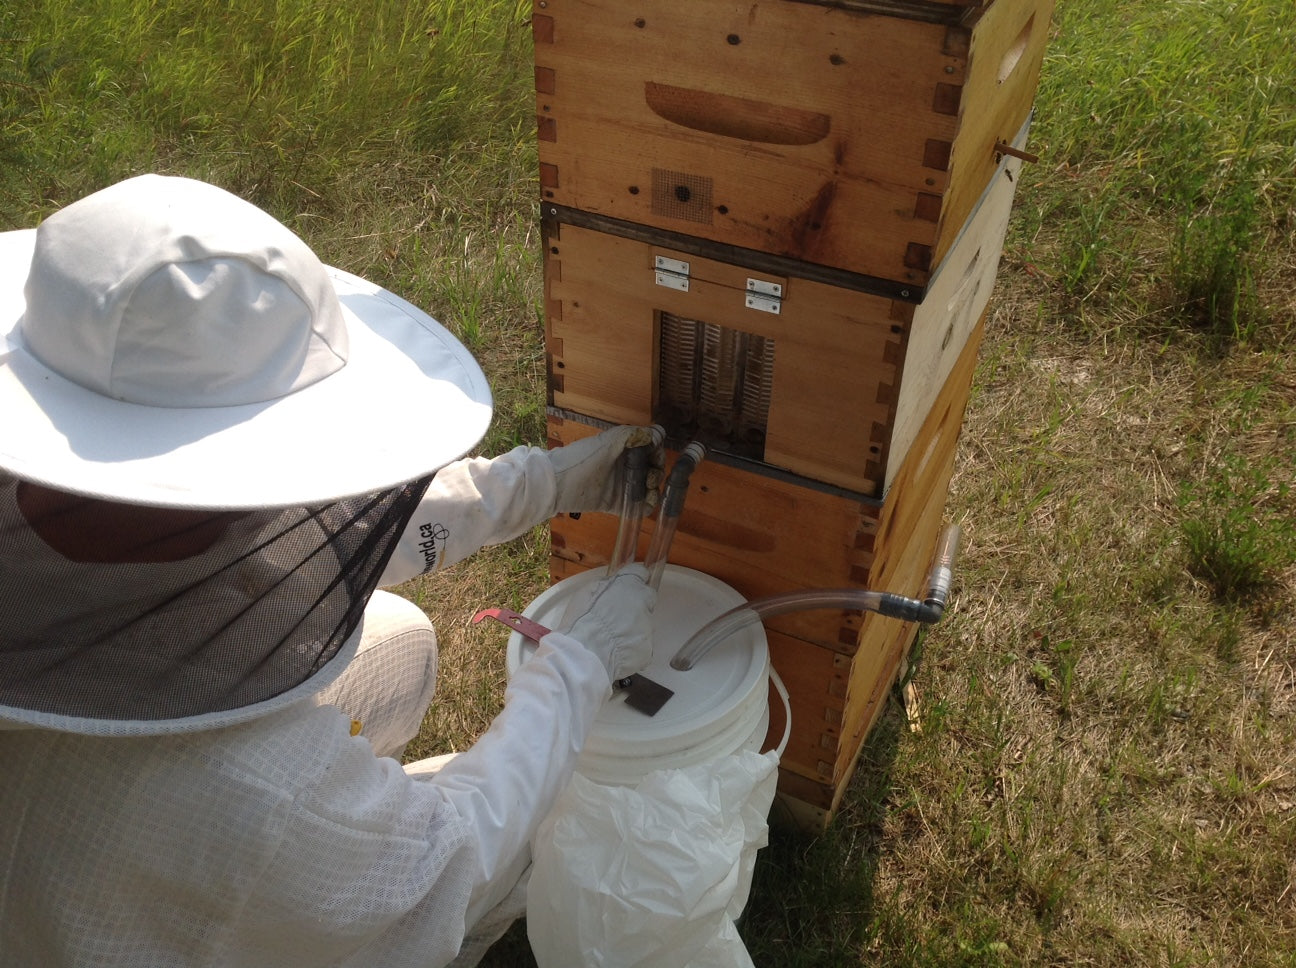 Removing auto-extract and comb honey from your hive